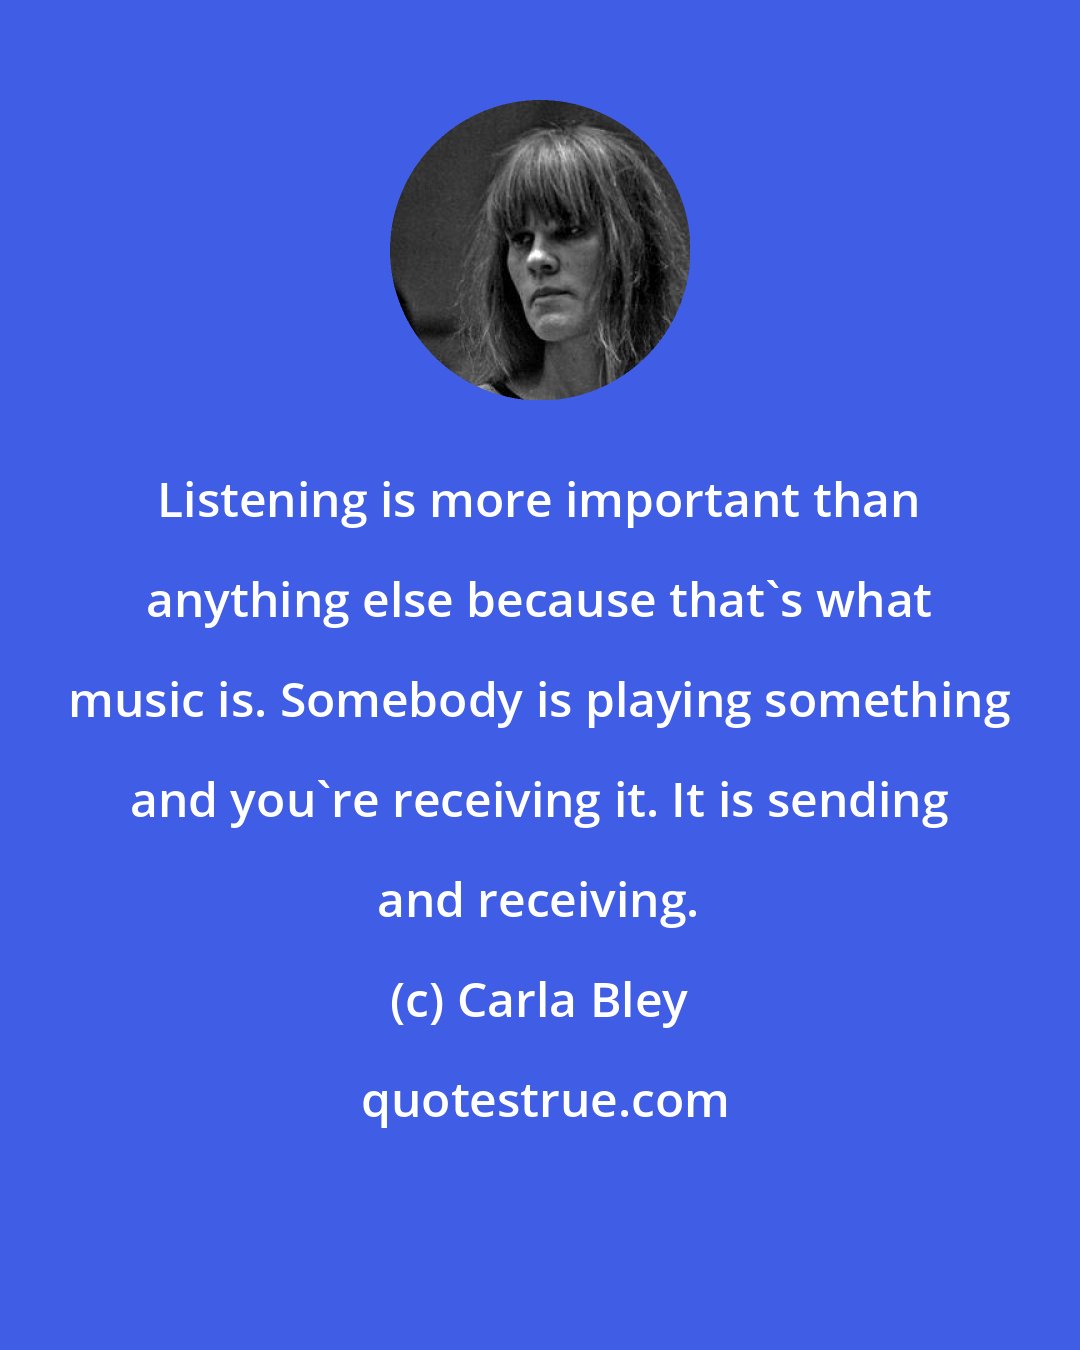 Carla Bley: Listening is more important than anything else because that's what music is. Somebody is playing something and you're receiving it. It is sending and receiving.